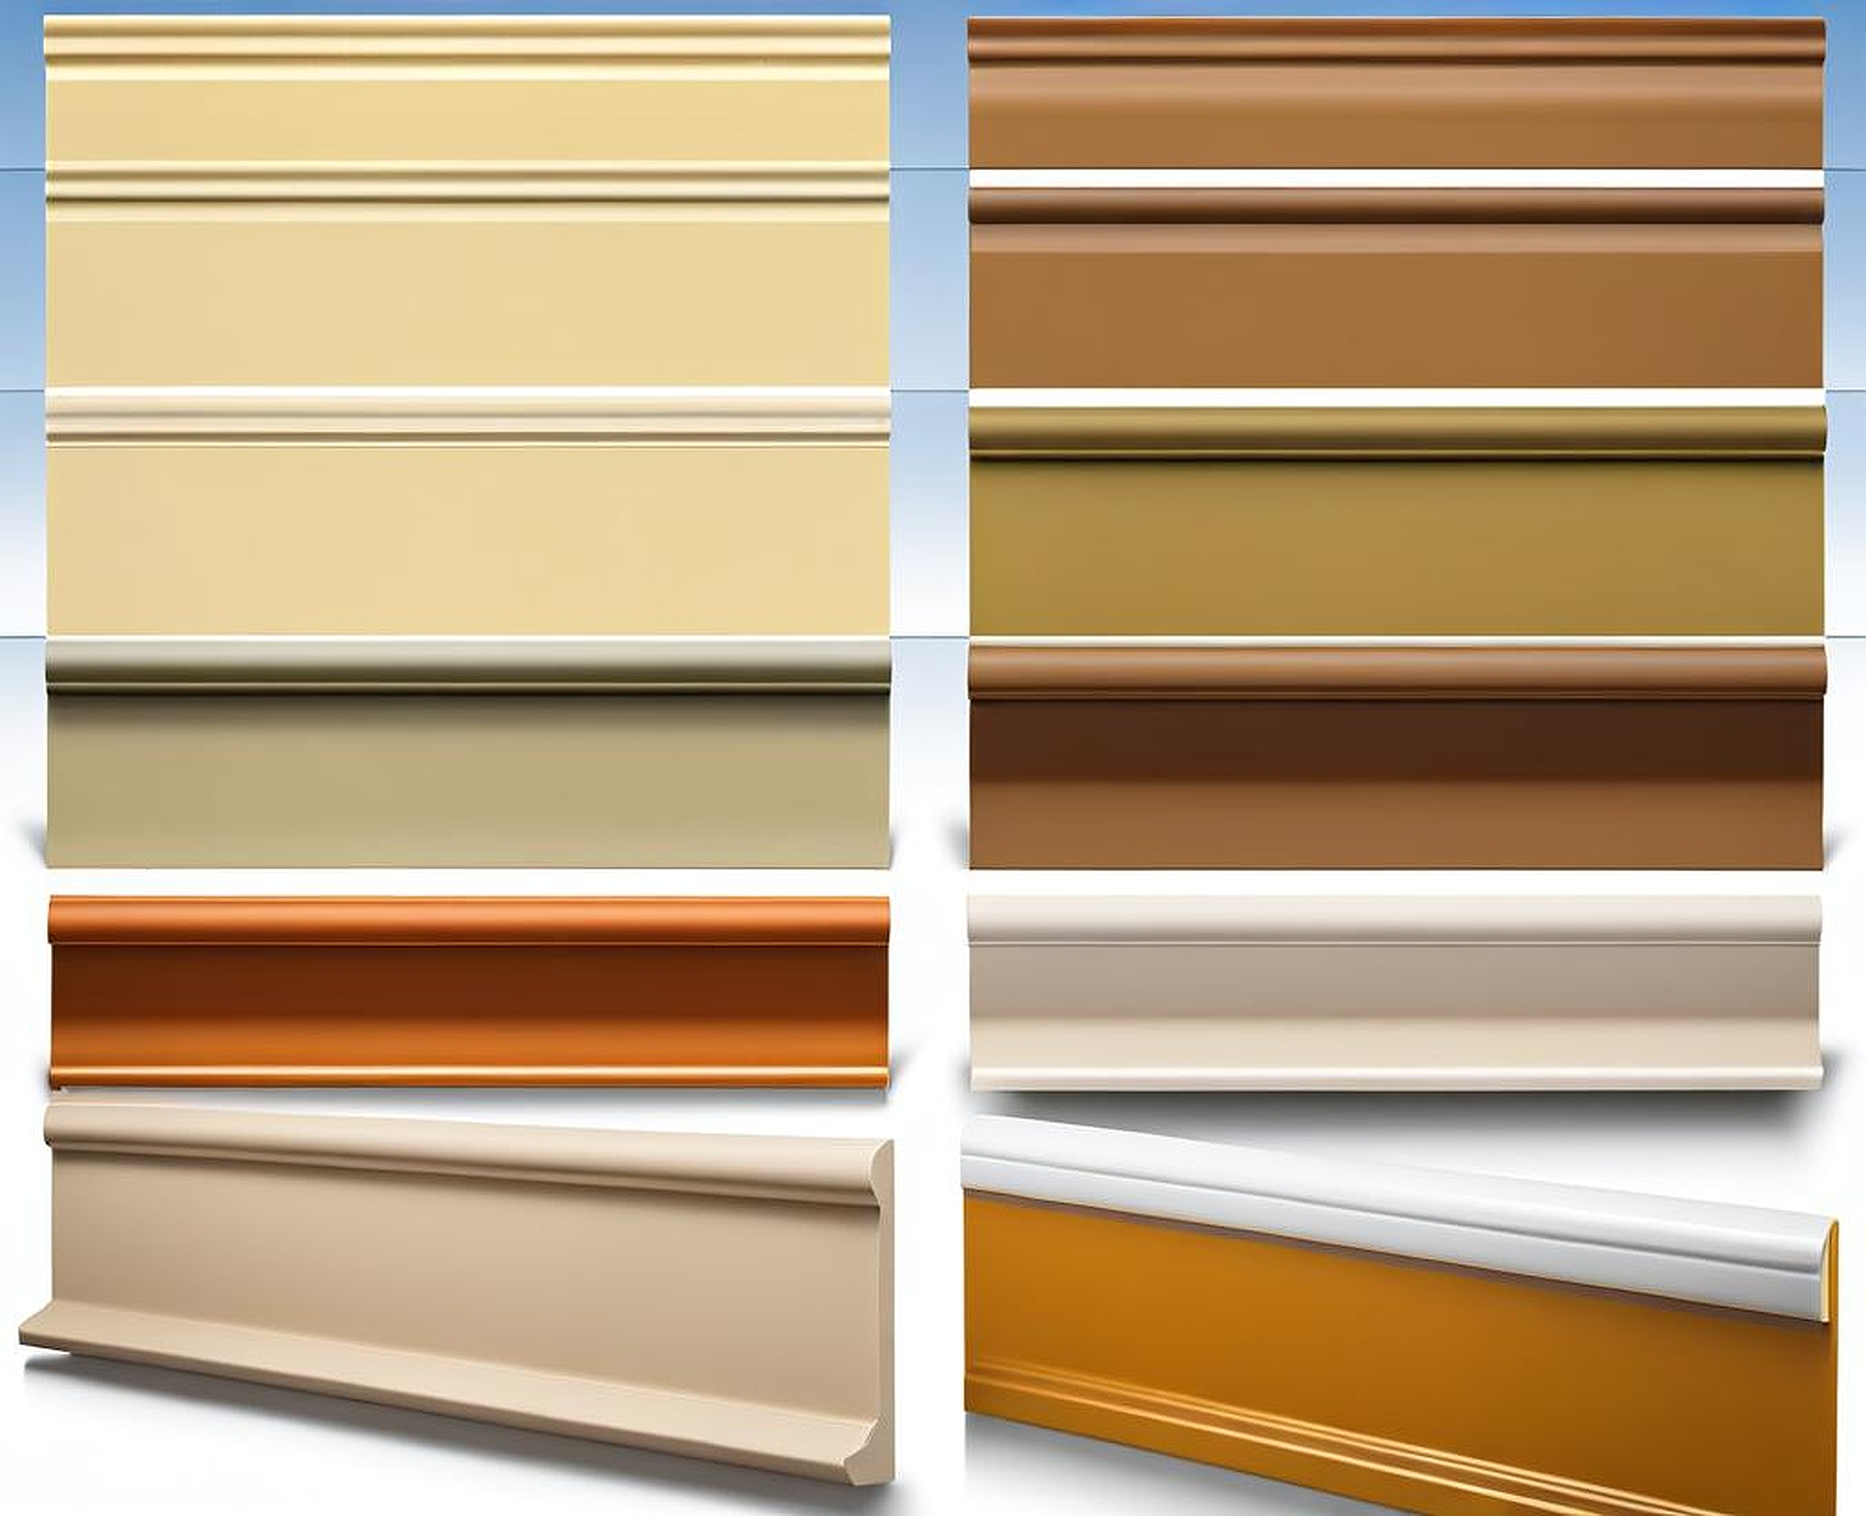 Understanding the Different Types of Caulk for Baseboard Applications